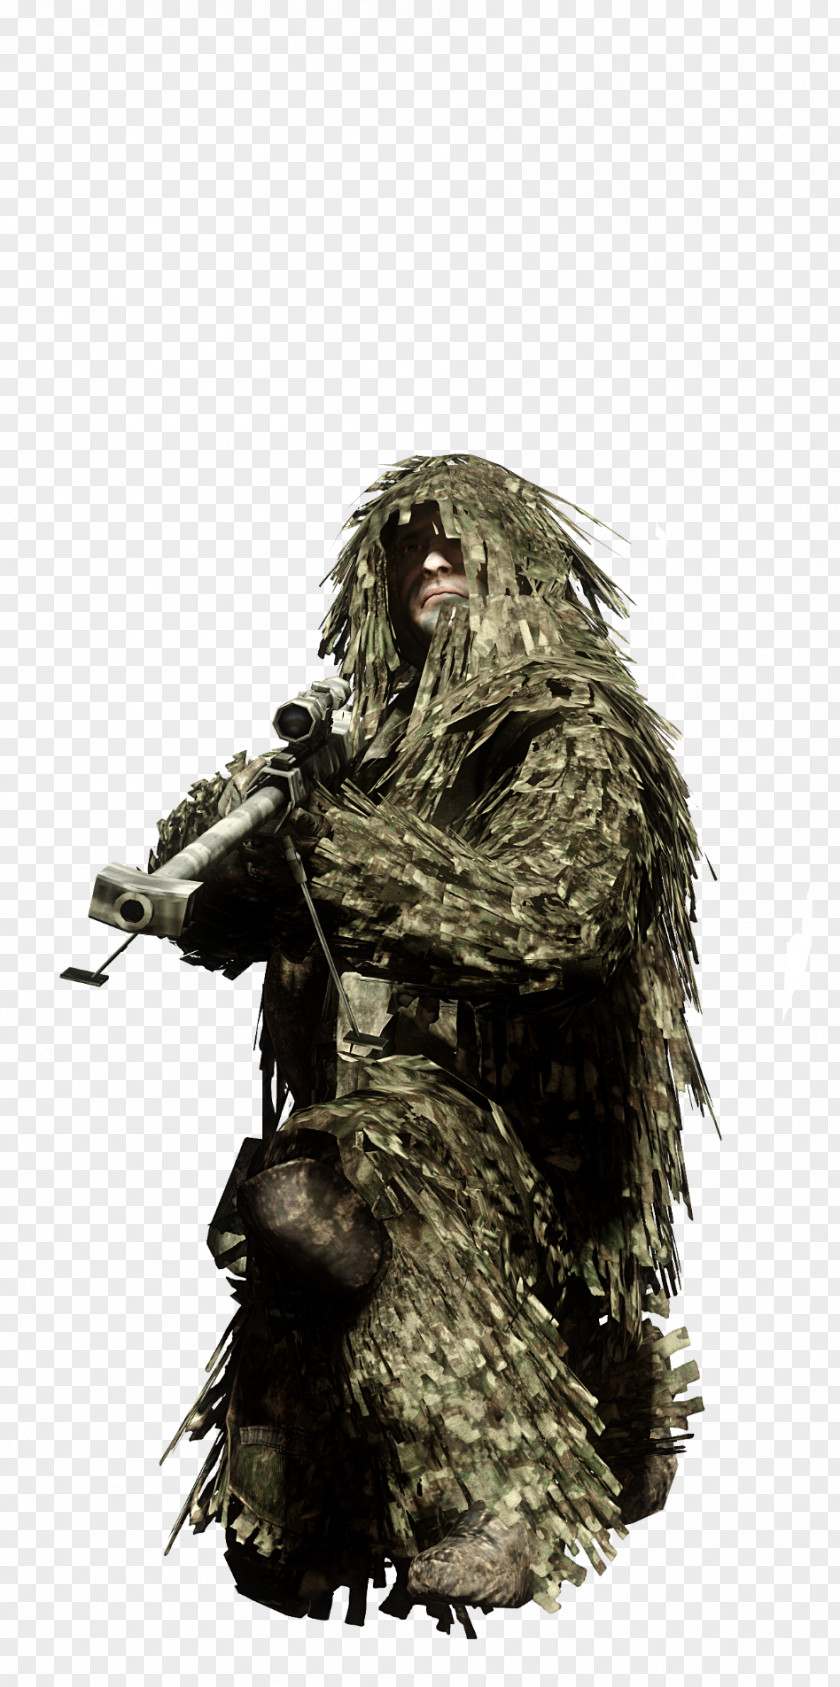 Battlefield: Bad Company 2 Battlefield 3 Ghillie Suits Camouflage PNG